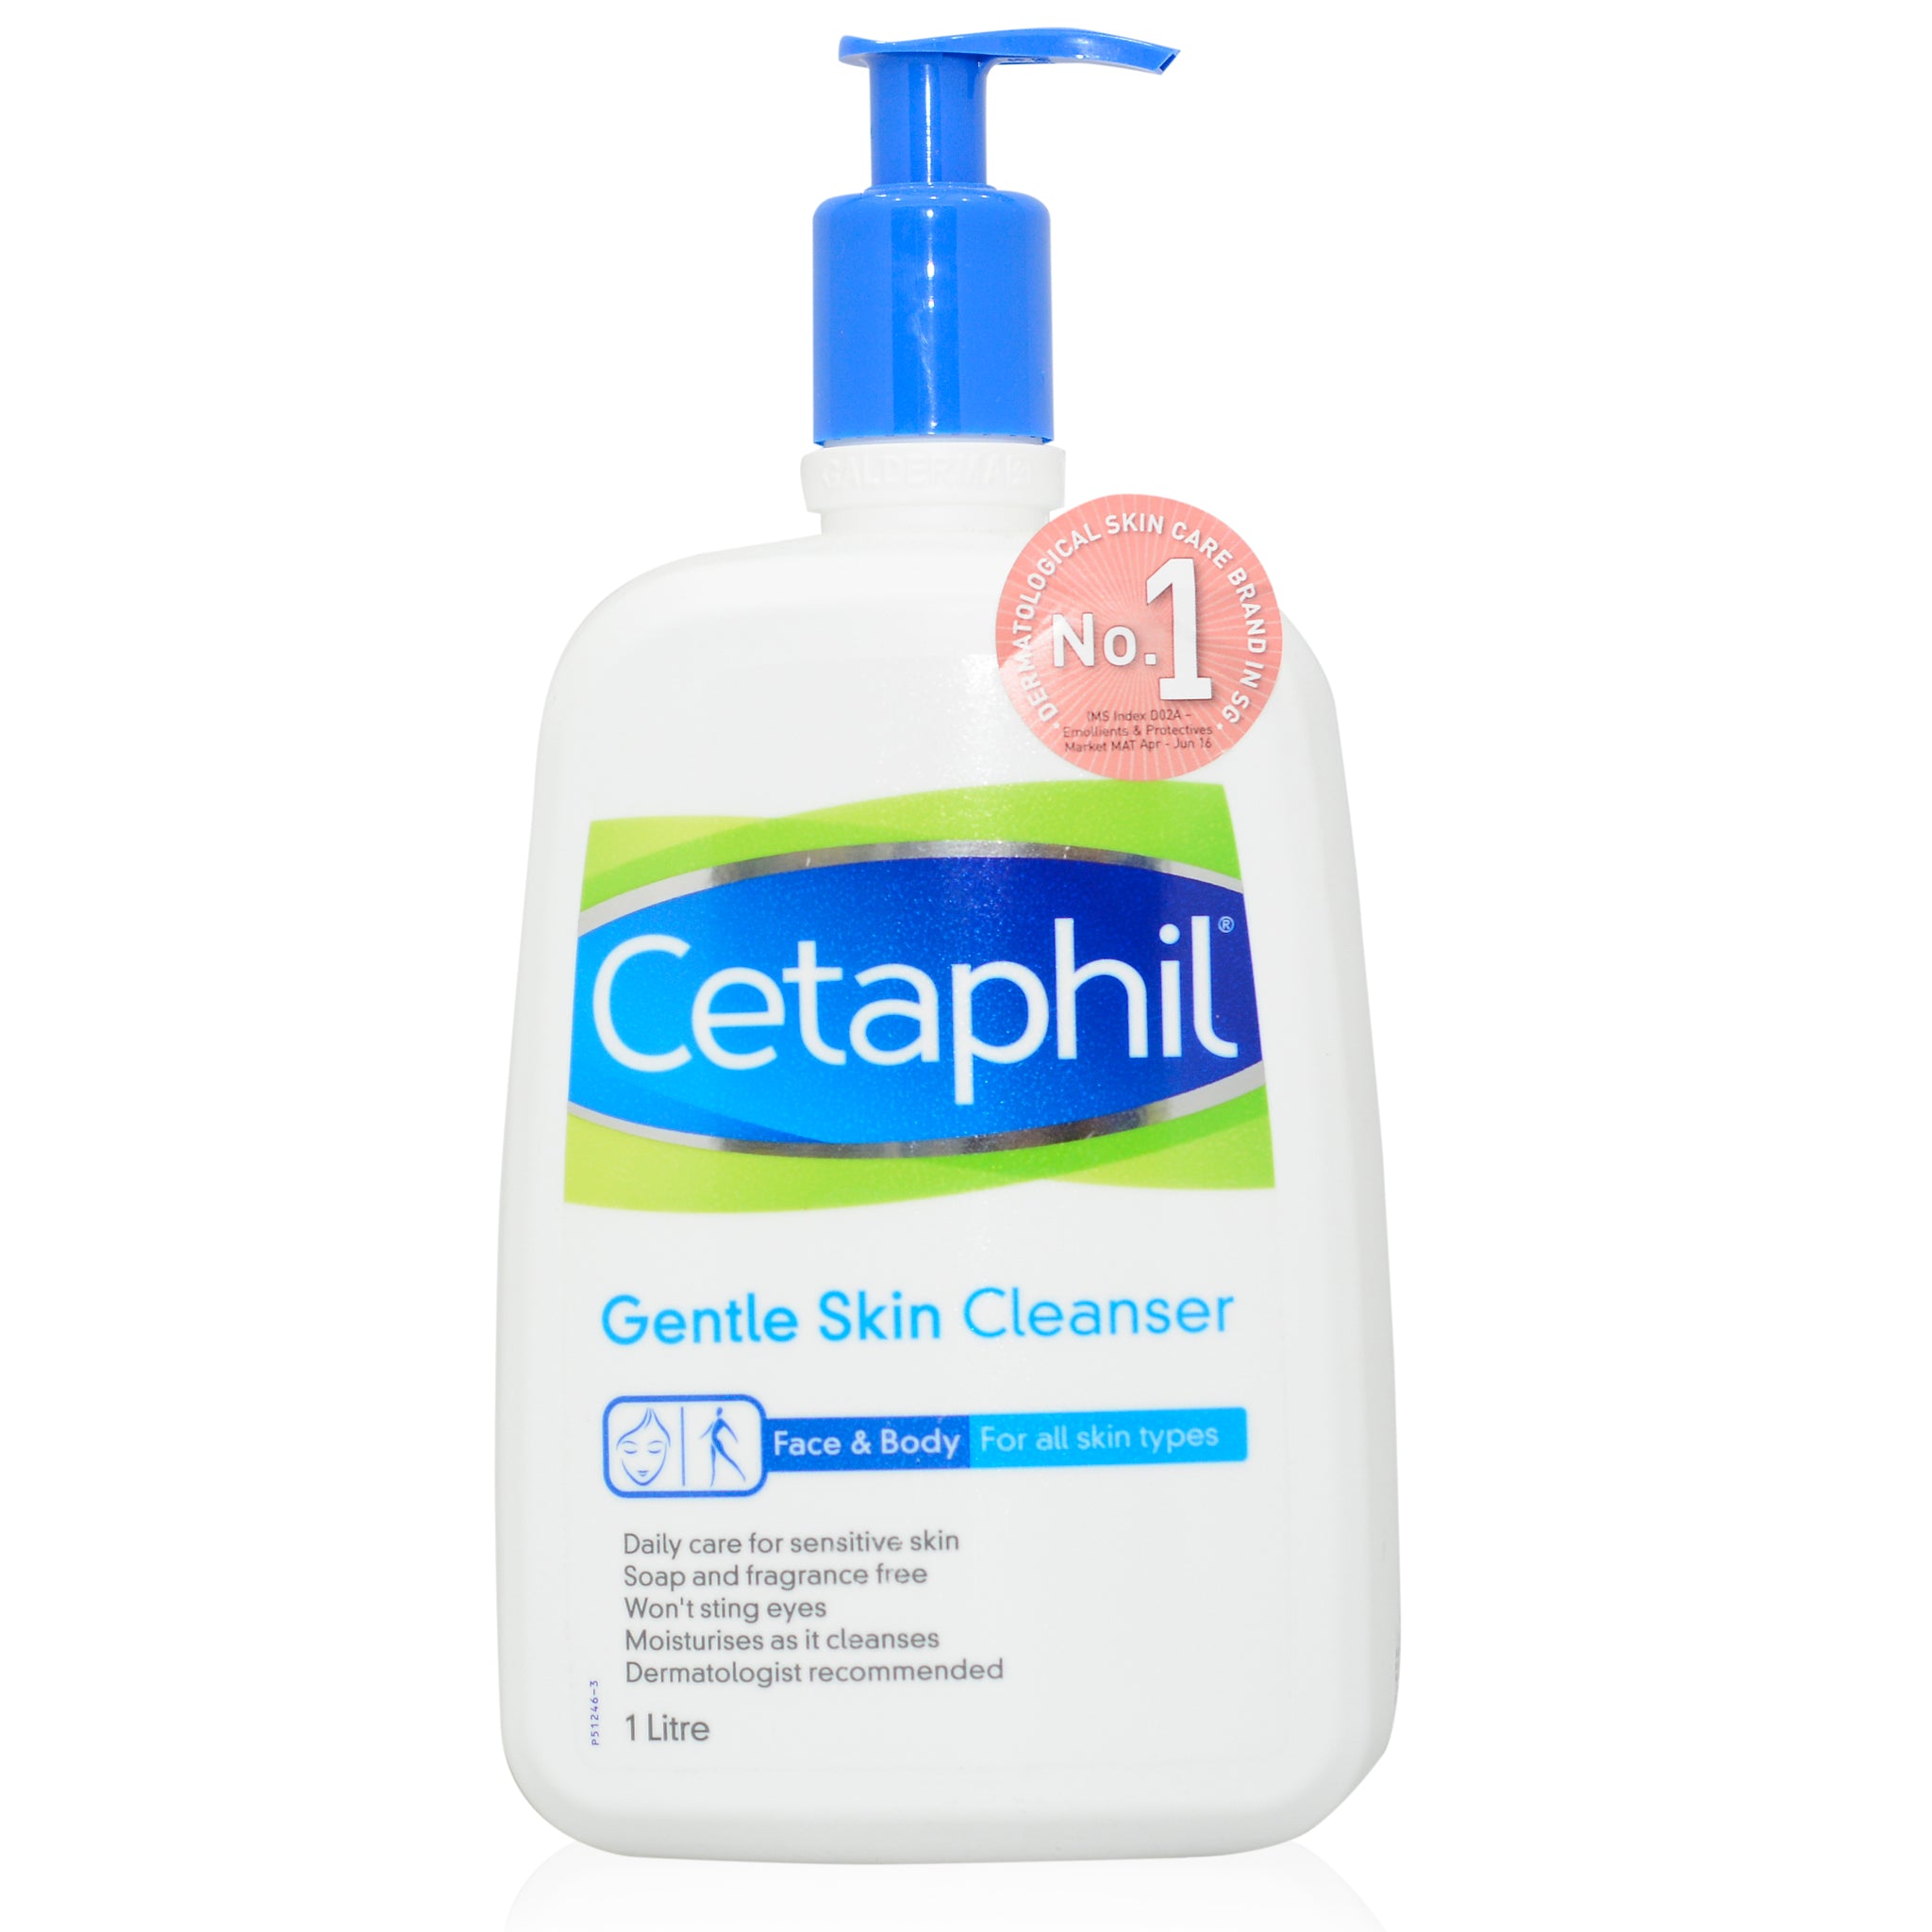 Cetaphil Skin Care Products - Woods Pharmacy